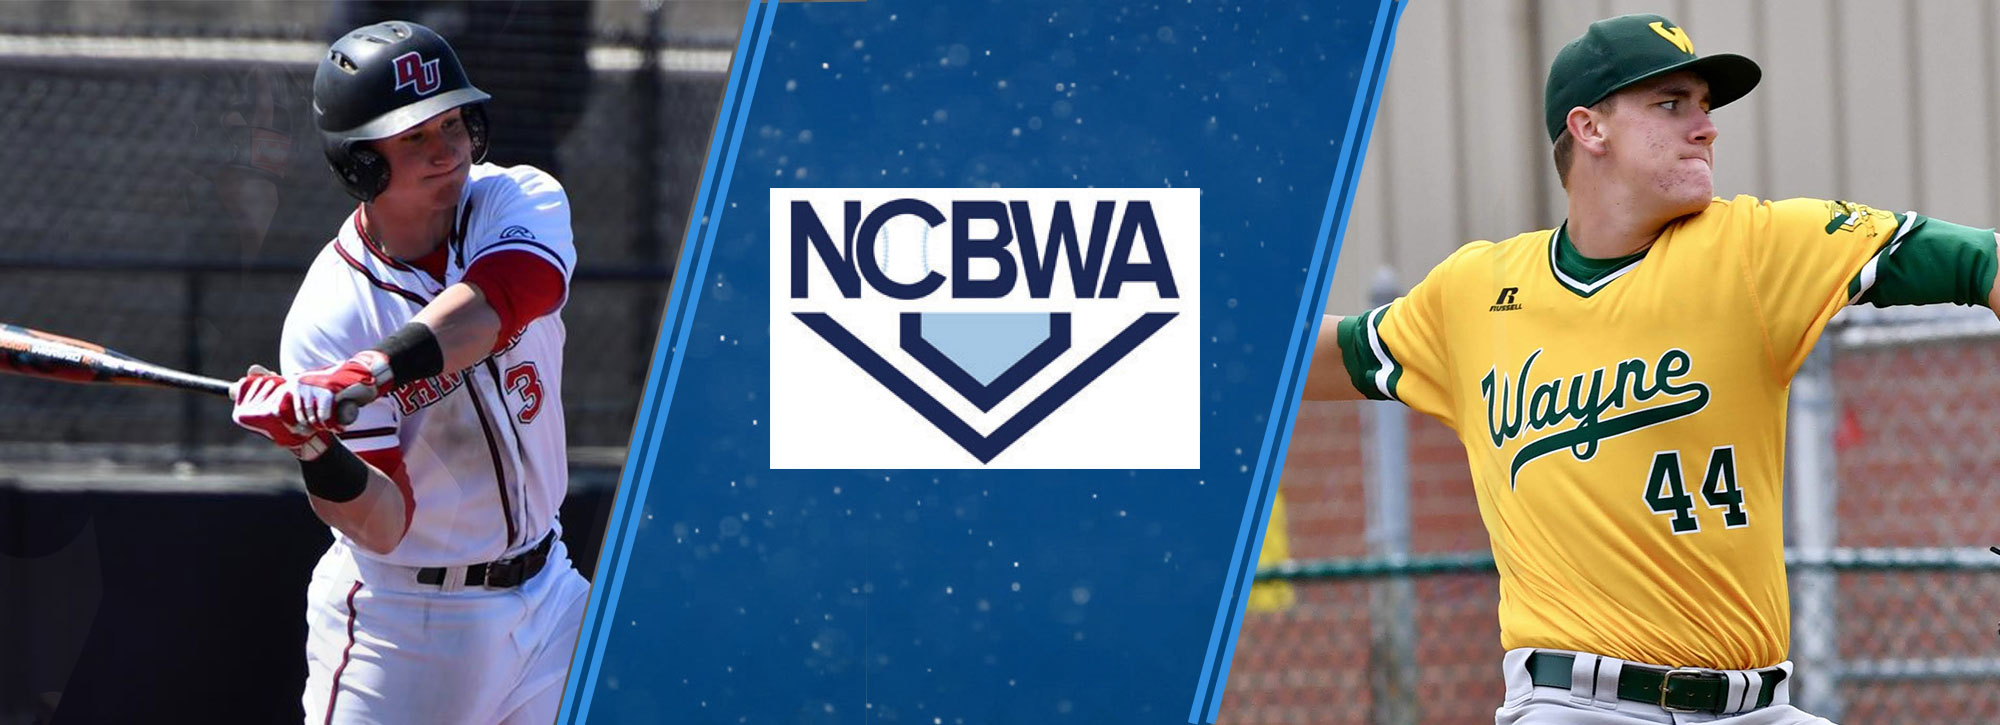 Davenport's Buchberger & Wayne State's Brown Garners NCBWA All-America Honors; Three Named Honorable Mention